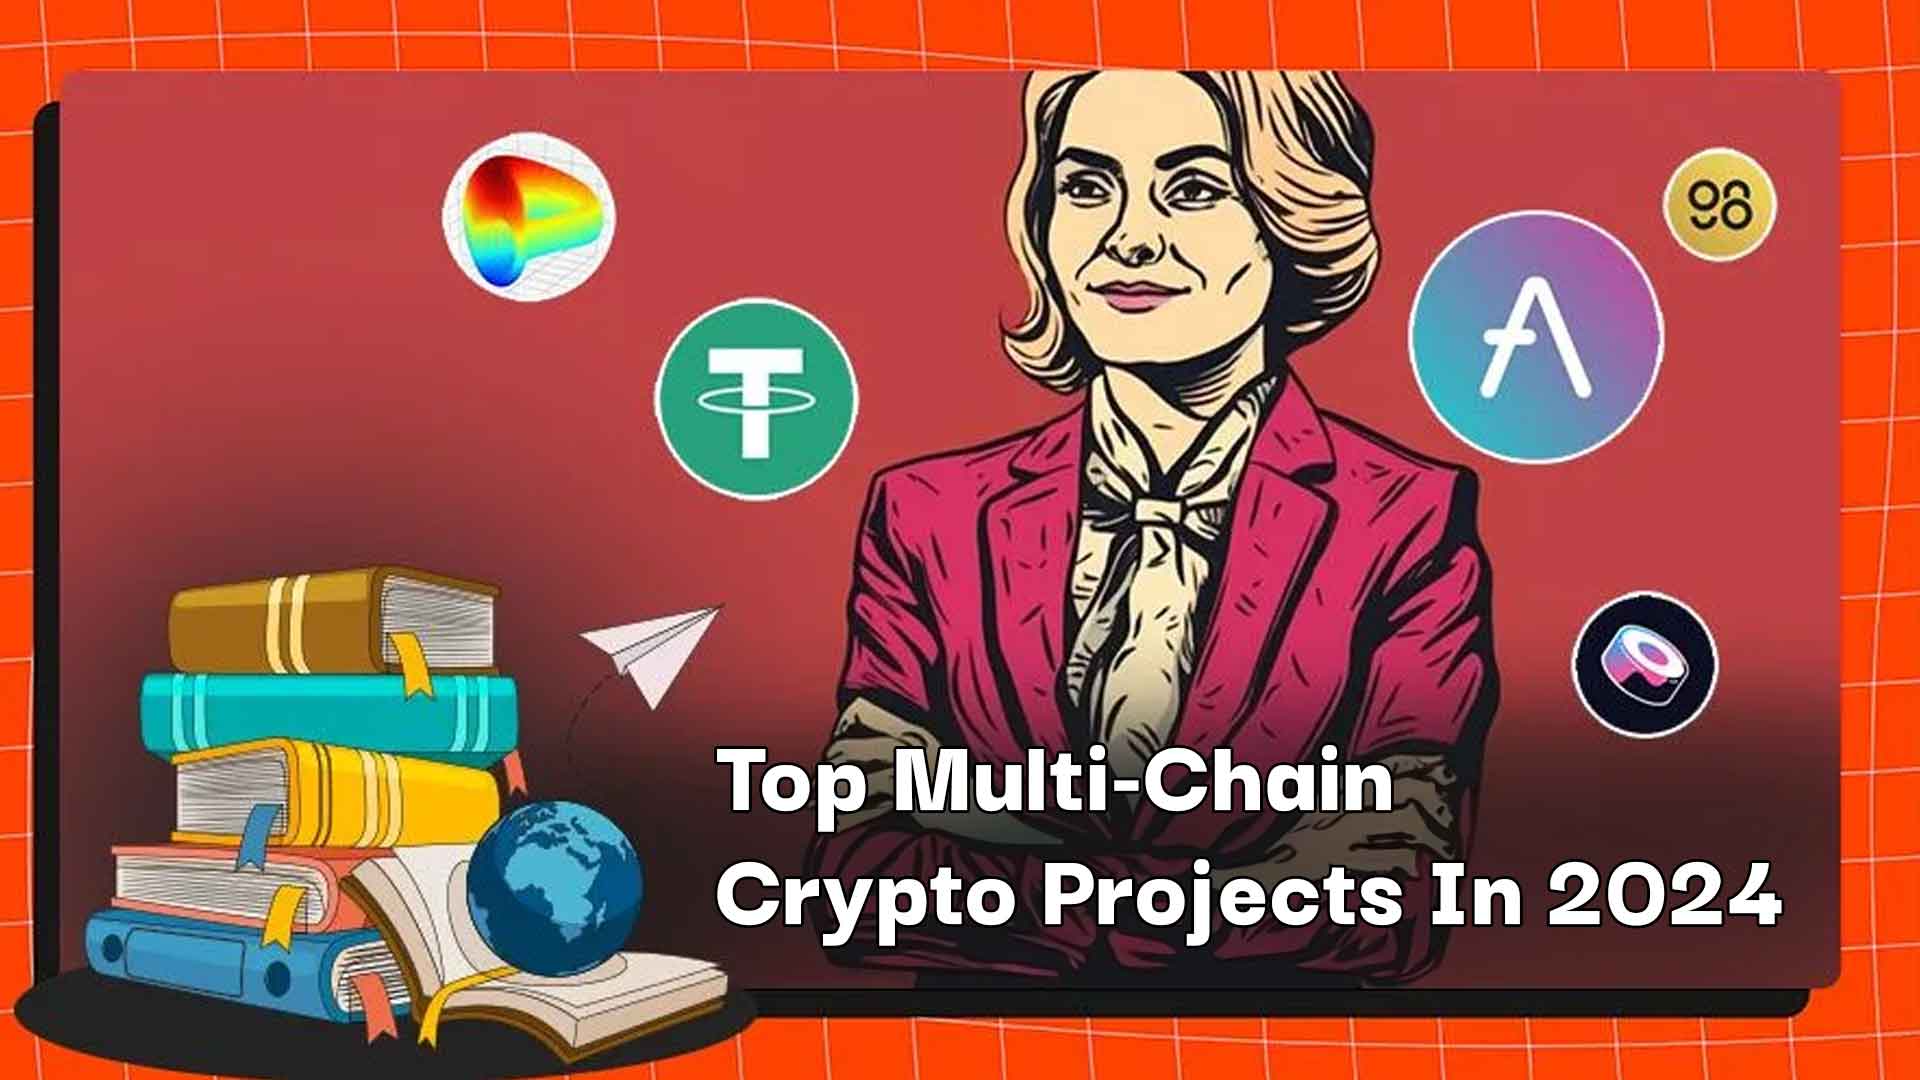 Top Multi-Chain Crypto Projects In 2024